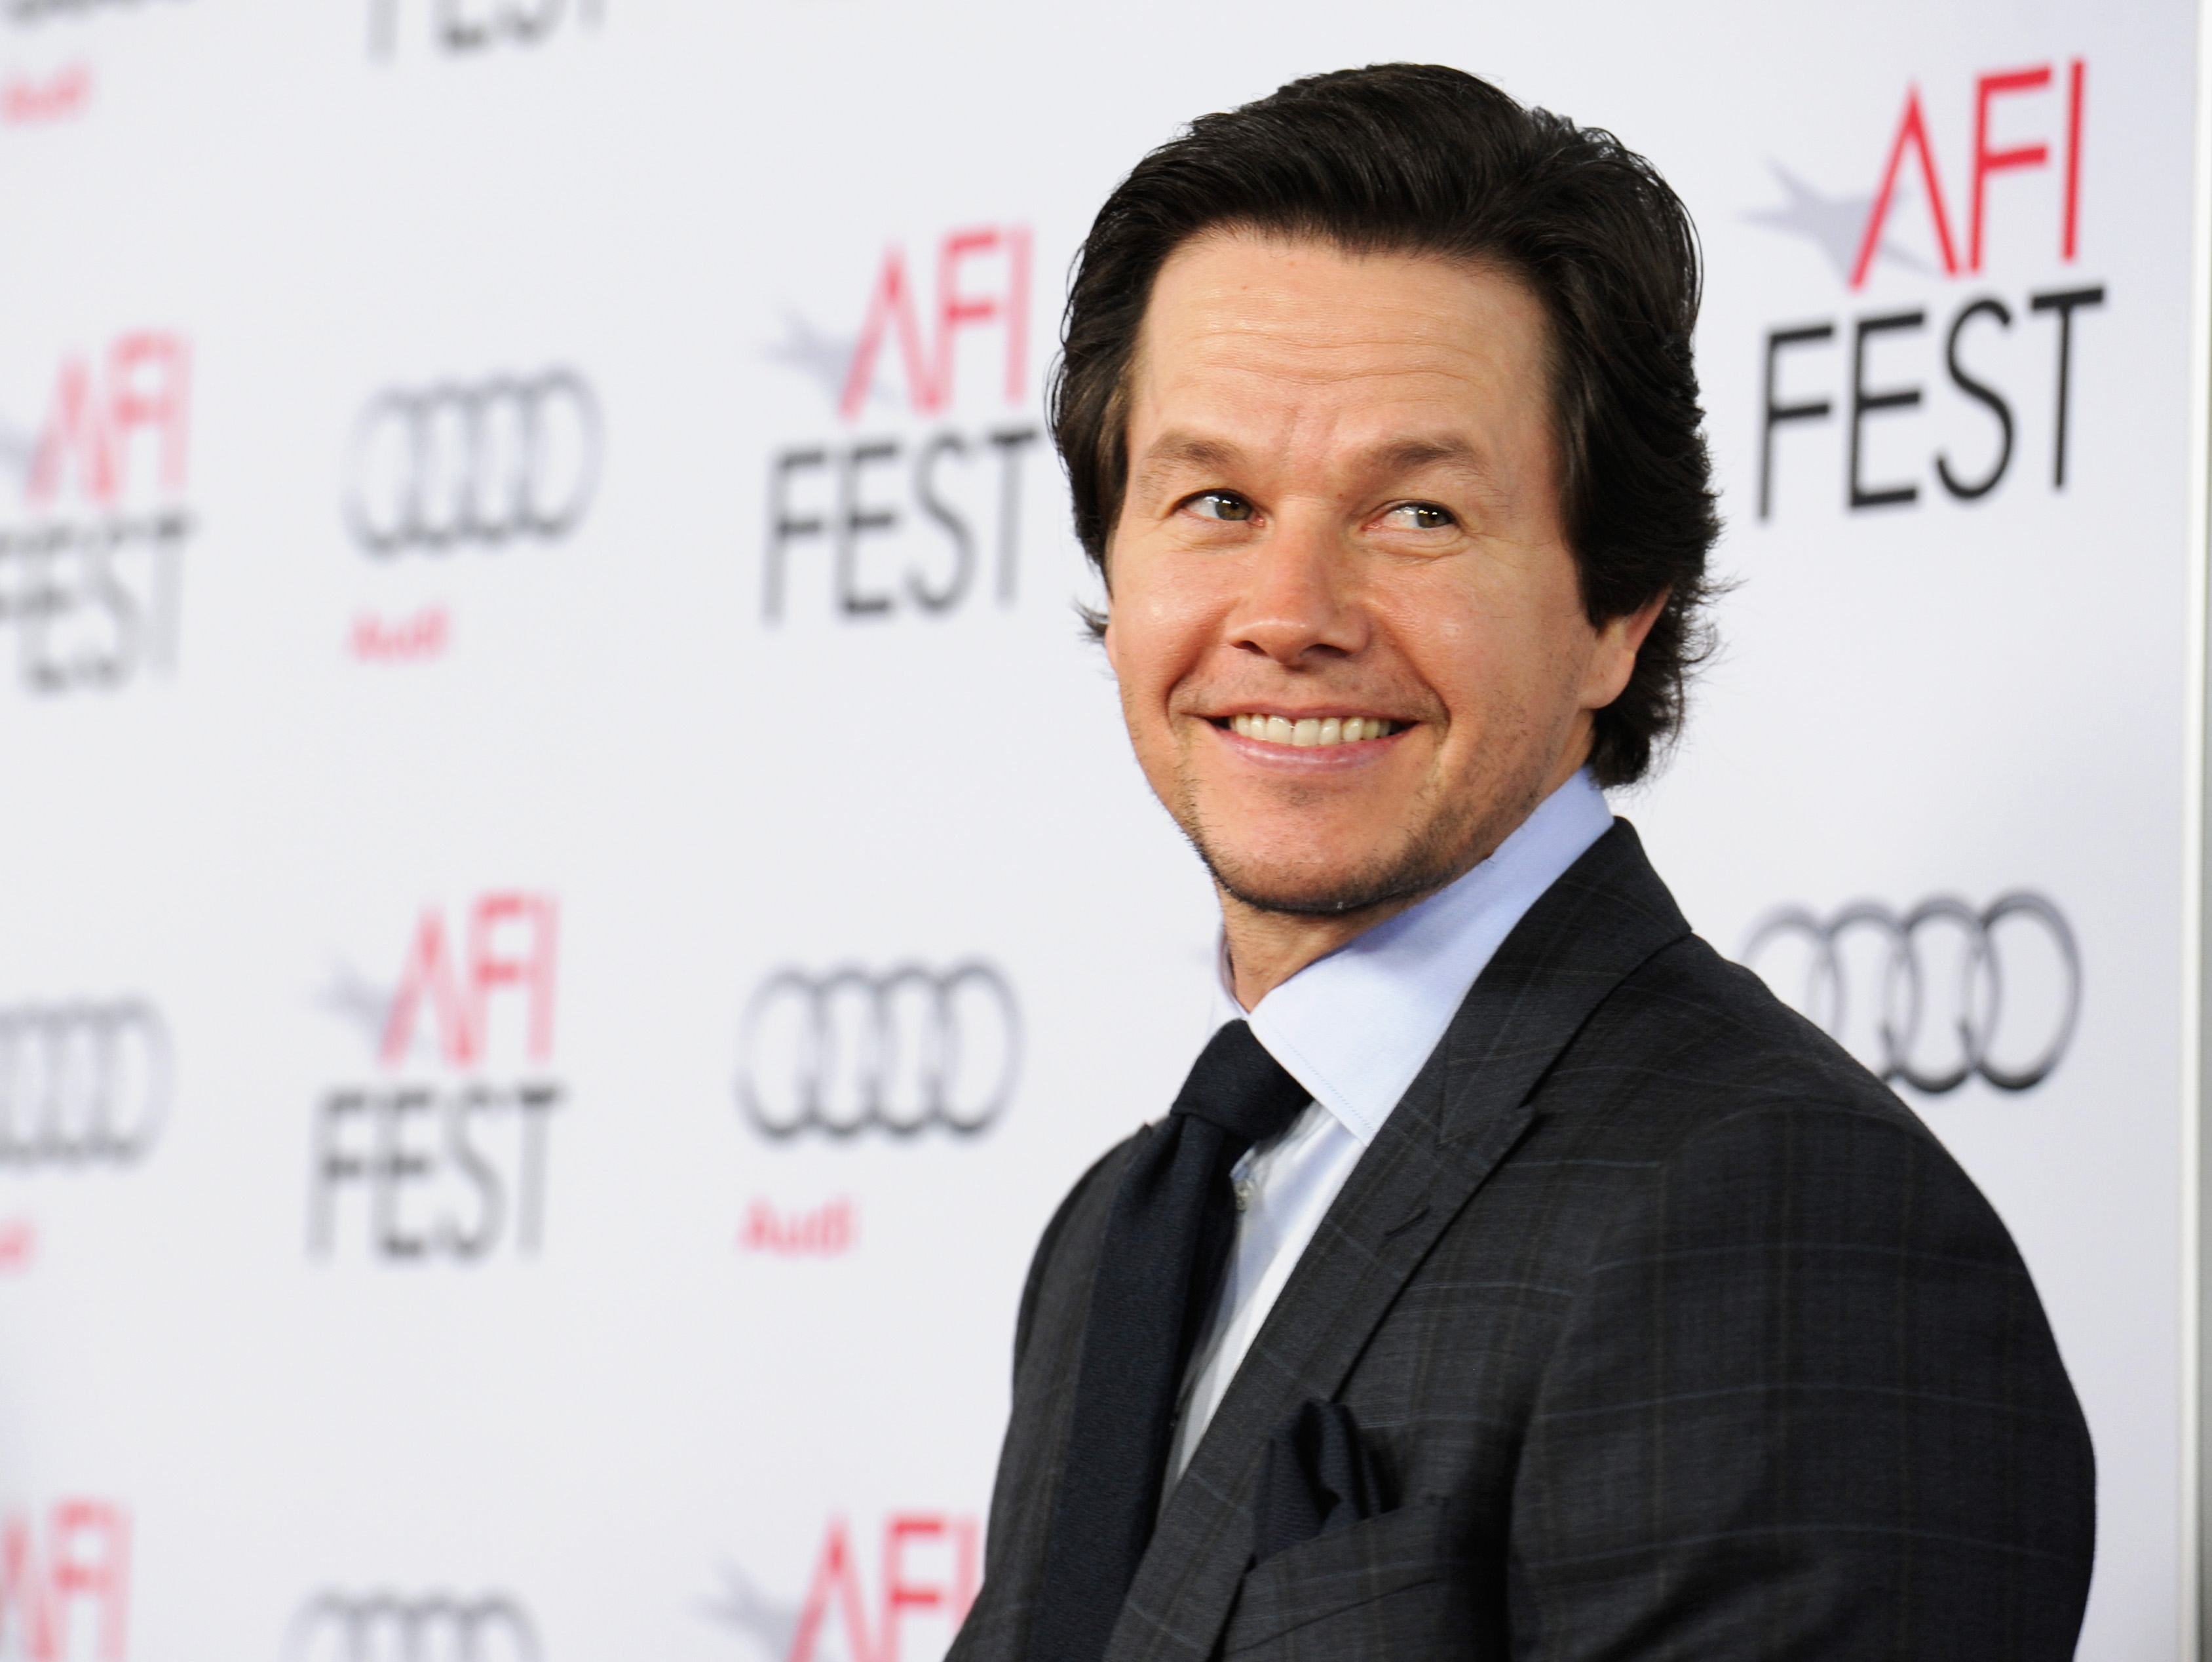 Actor Mark Wahlberg attends the screening of "The Gambler" during the AFI FEST 2014 presented by Audi at Dolby Theatre on Nov. 10, 2014 in Hollywood, Calif. (Valerie Macon&mdash;Getty Images)